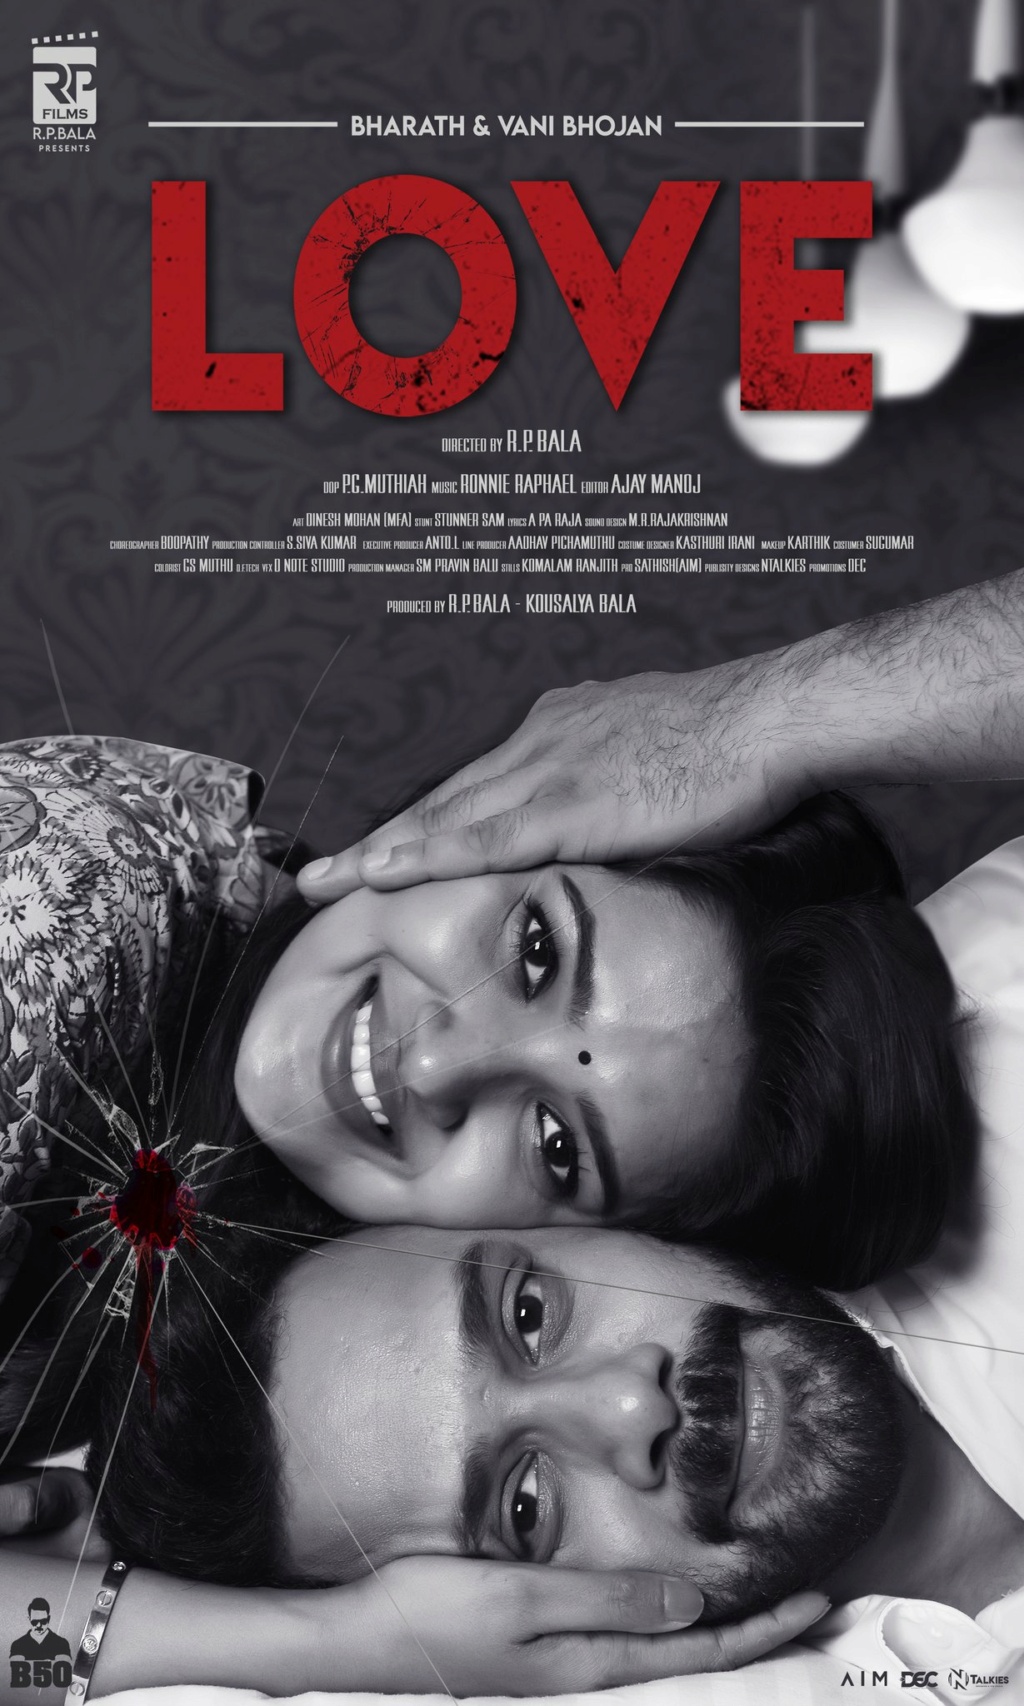 The First look of the movie LOVE B5010